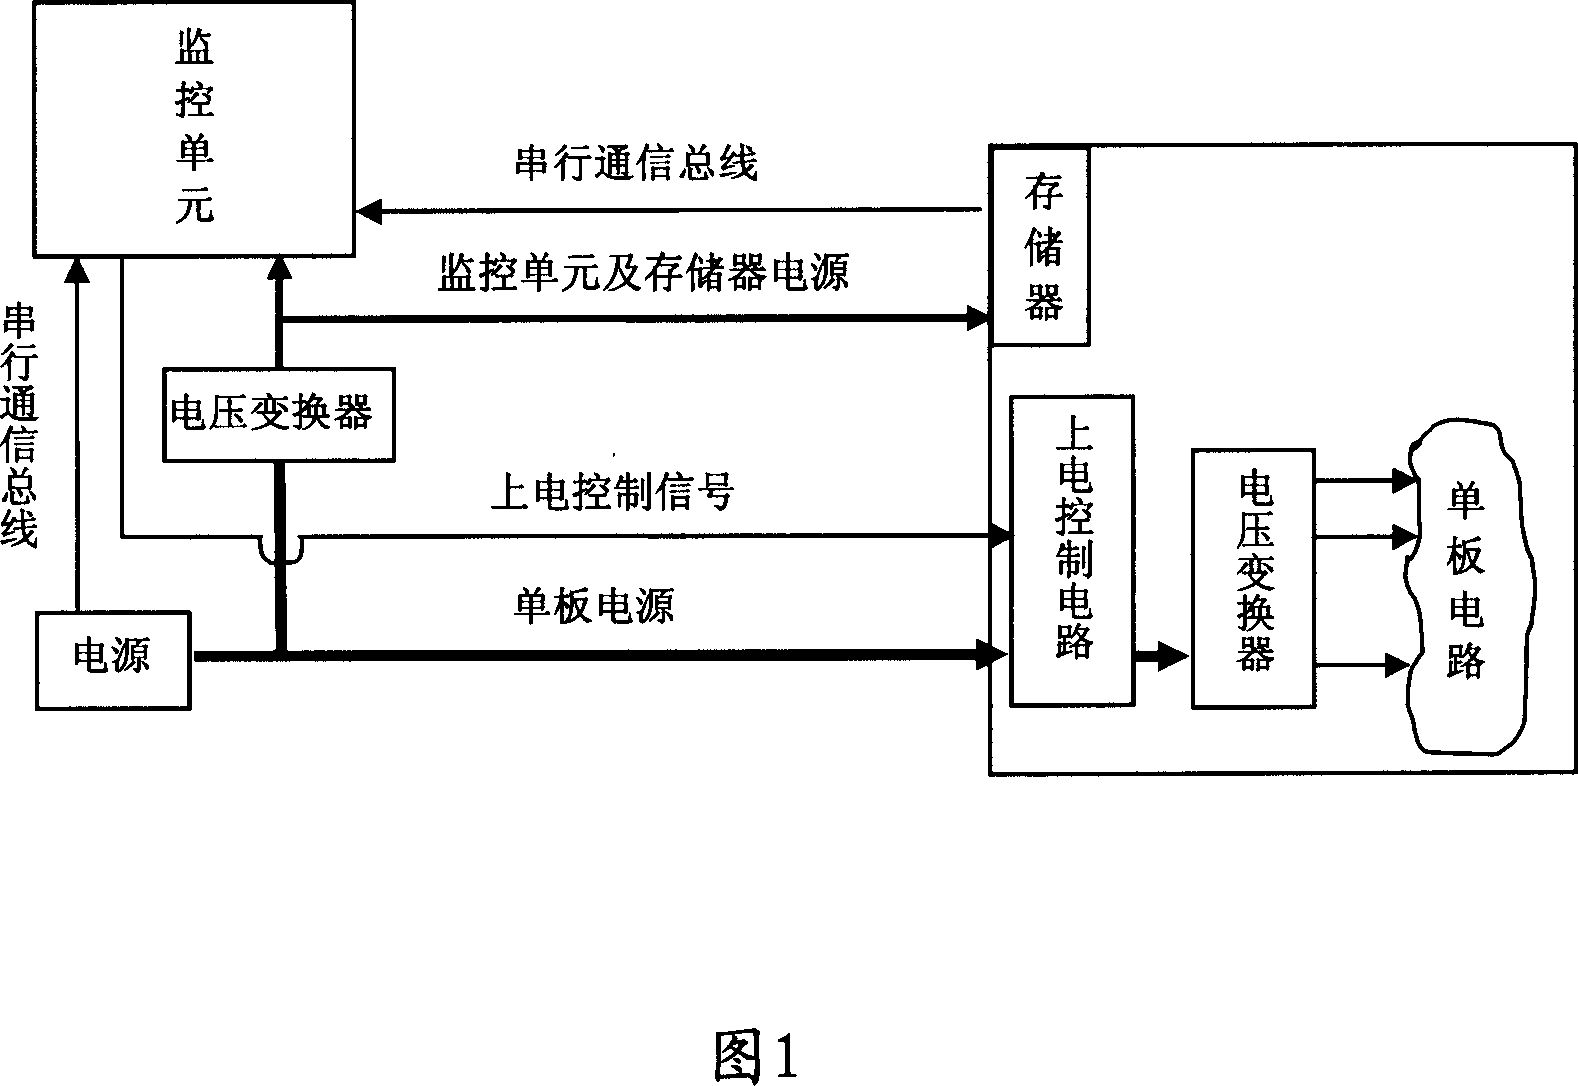 Single board and method for controlling power supply of it